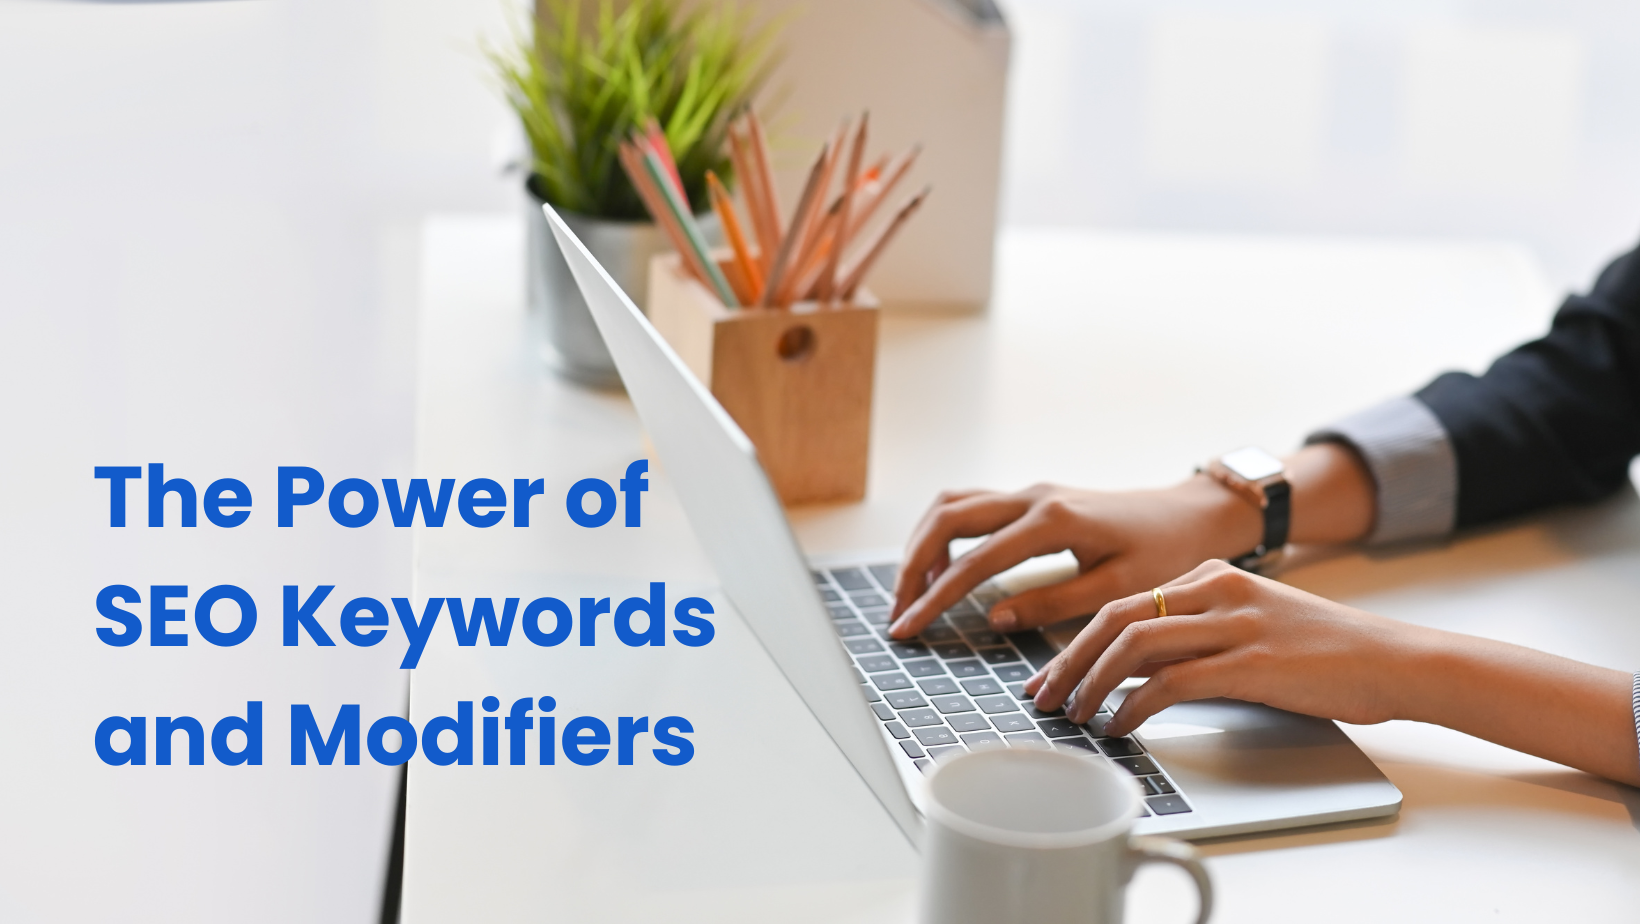 Navigating The Digital Marketplace: The Power of SEO Keywords and Modifiers